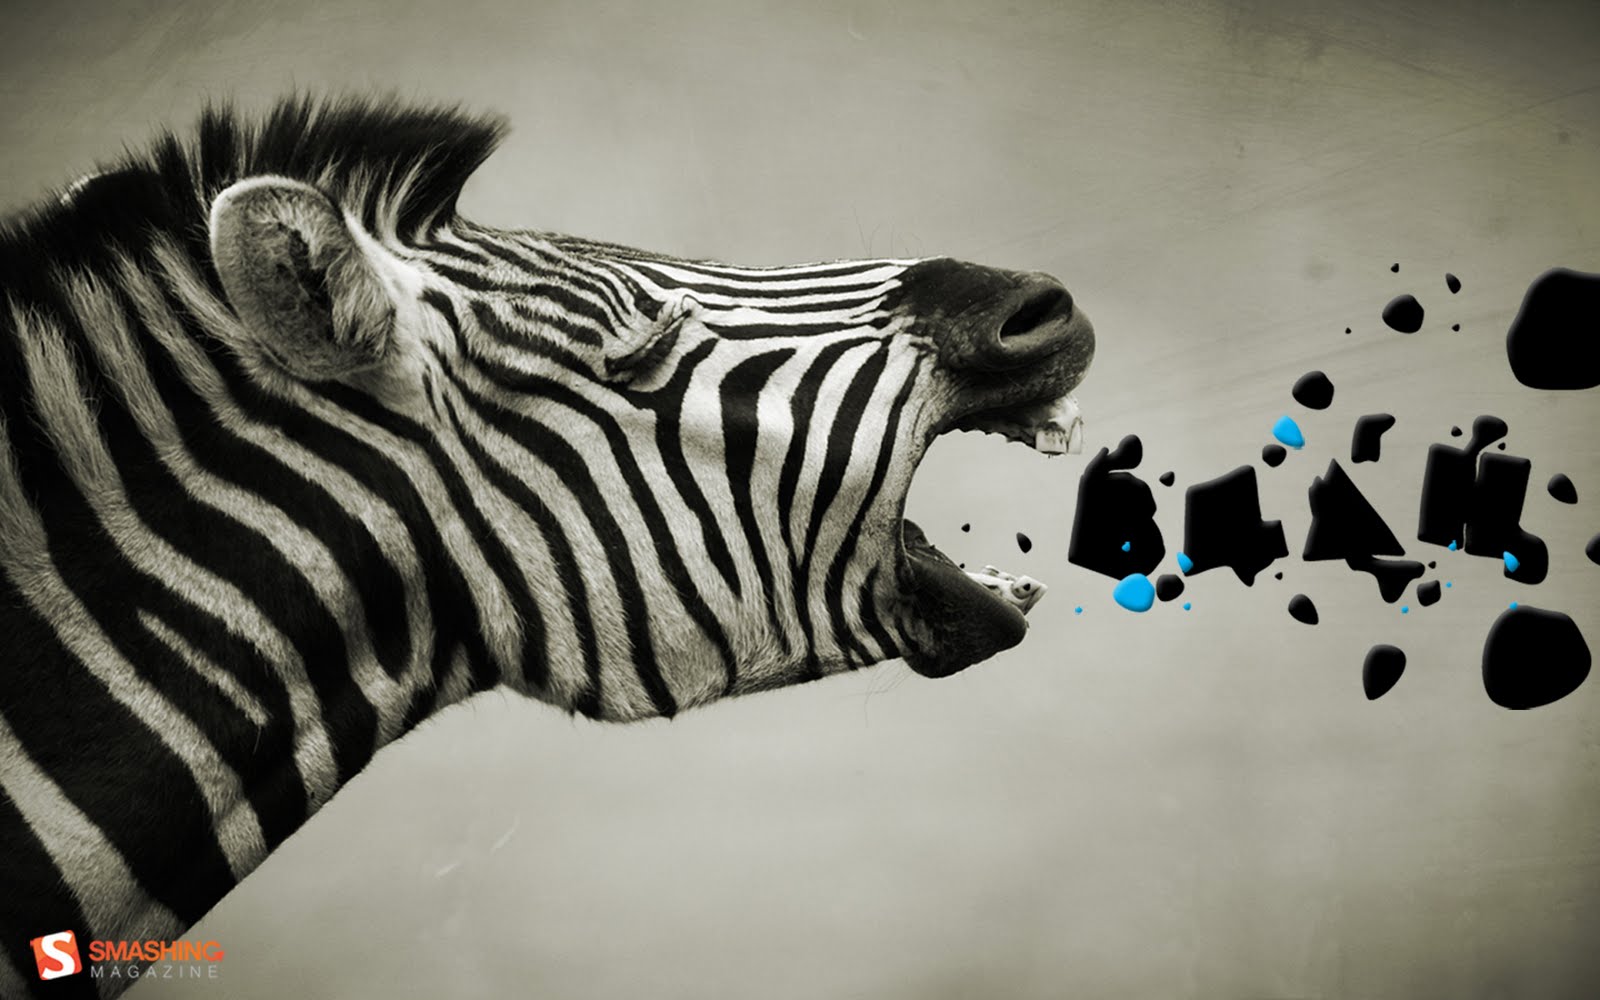 Funny Image Collection: Image for Zebra wallpaper for computer!